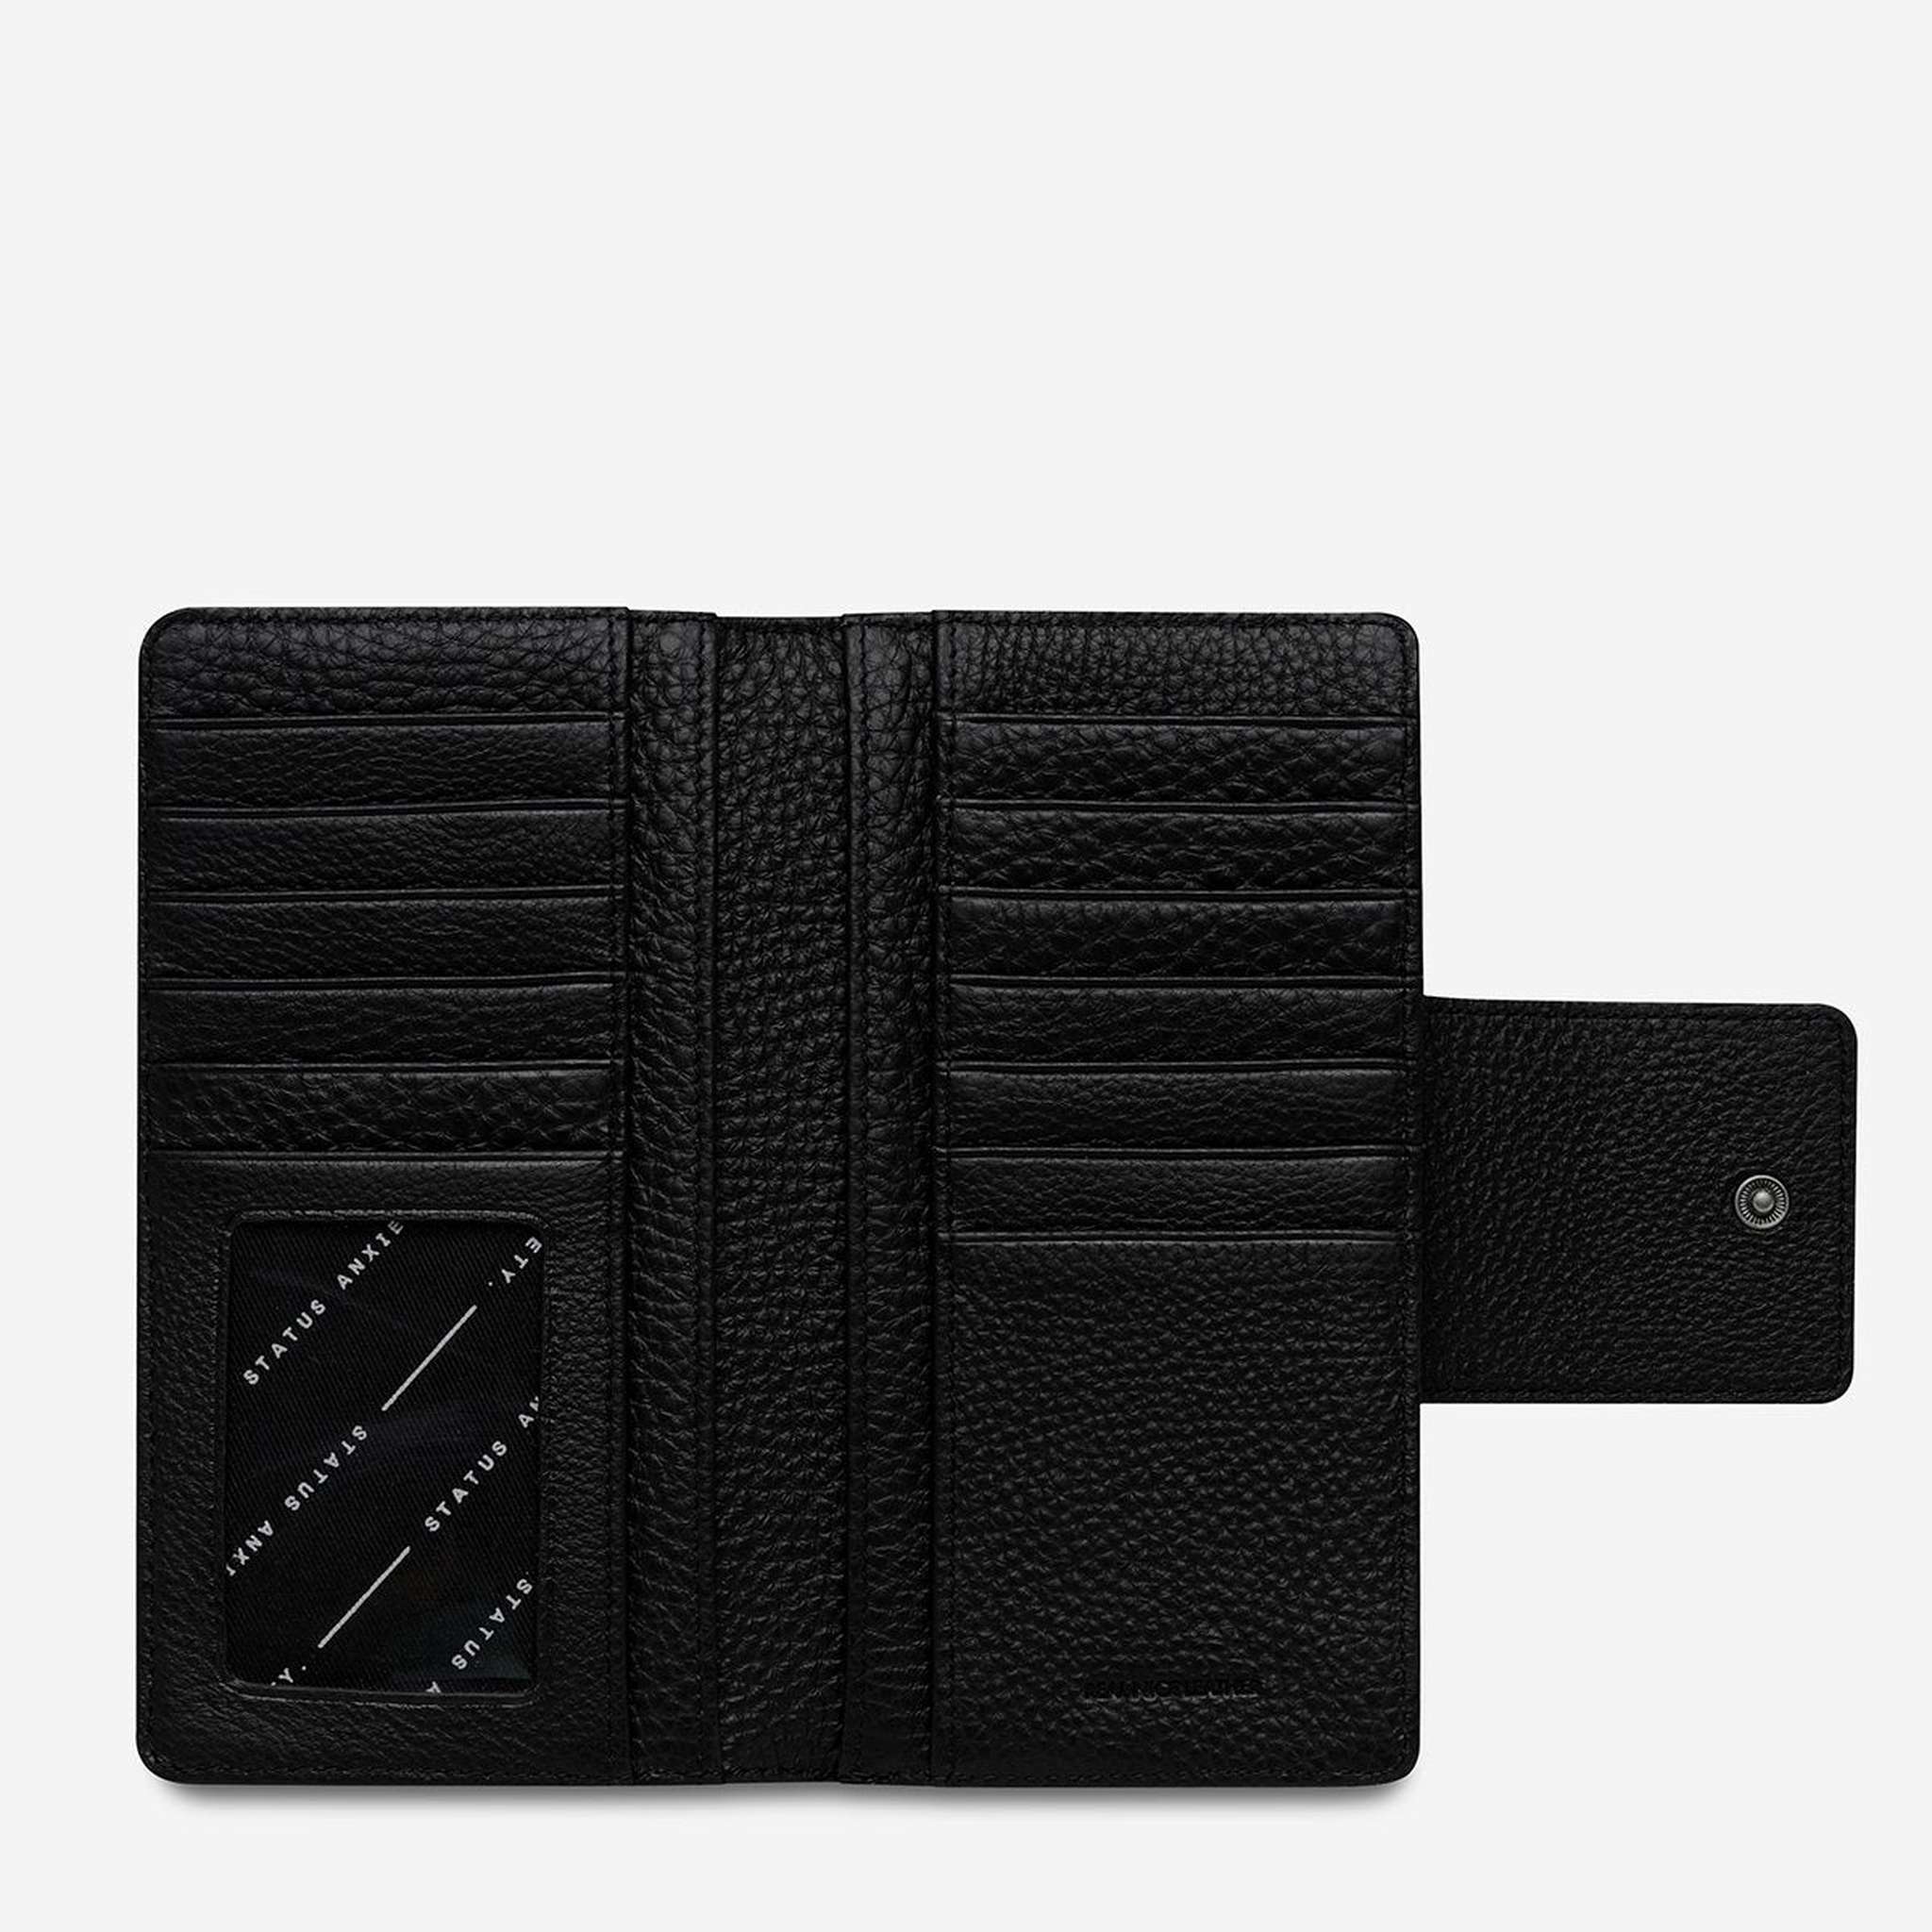 status anxiety leather womens ruins black wallet insidestatus anxiety leather womens ruins black wallet inside